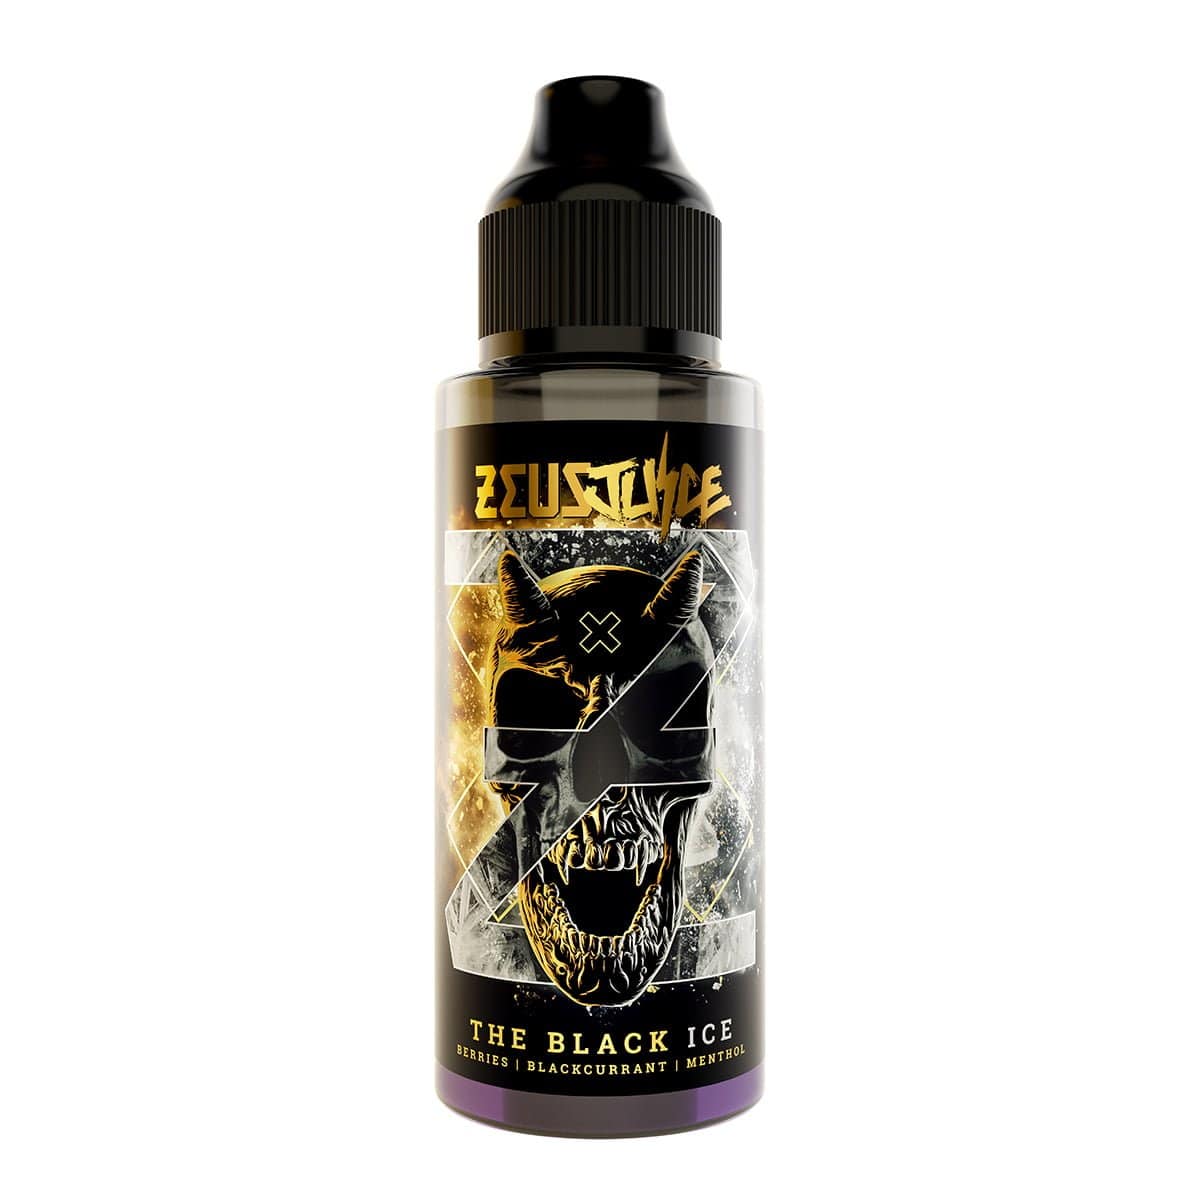 Load image into Gallery viewer, The Black ICE by Zeus Juice - 100ml Short Fill E-Liquid
